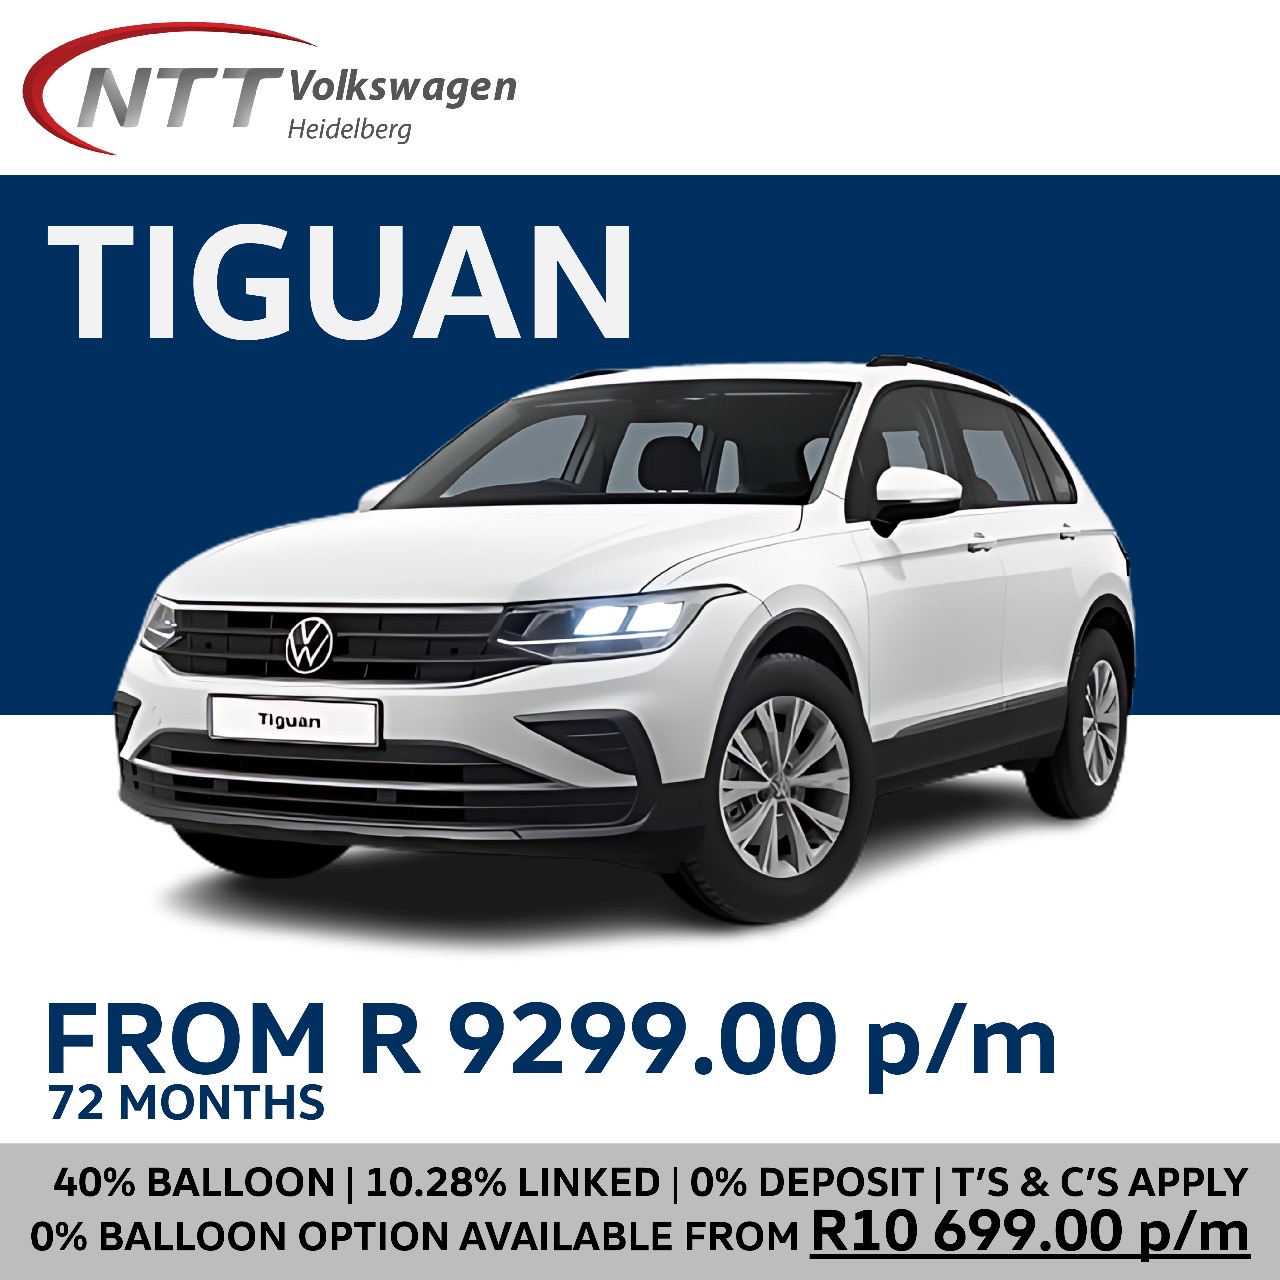 VW TIGUAN - NTT Volkswagen - New, Used & Demo Cars for Sale in South Africa